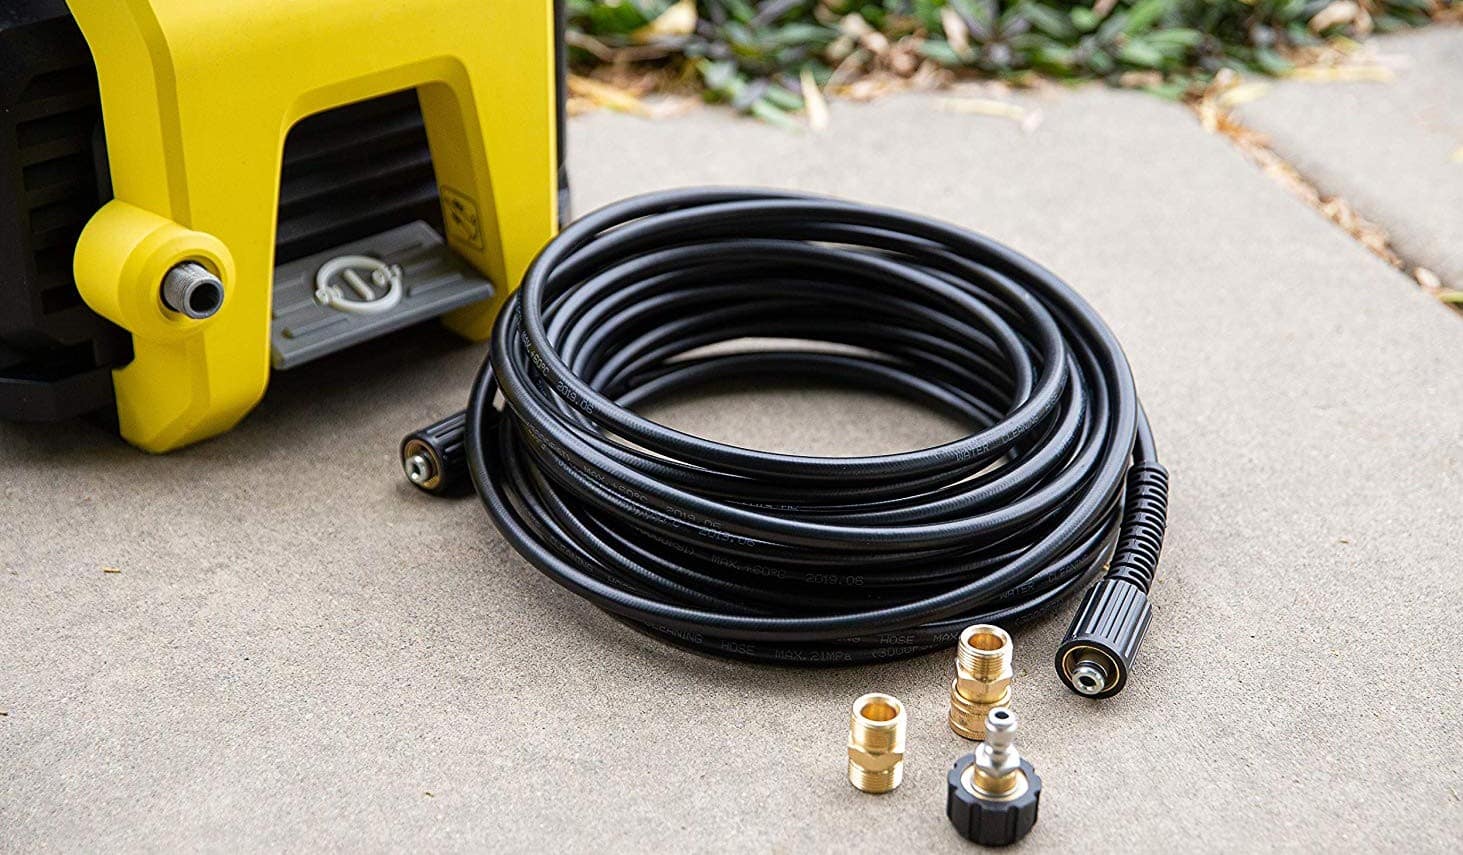 Can You Use a Garden Hose on Pressure Washer?